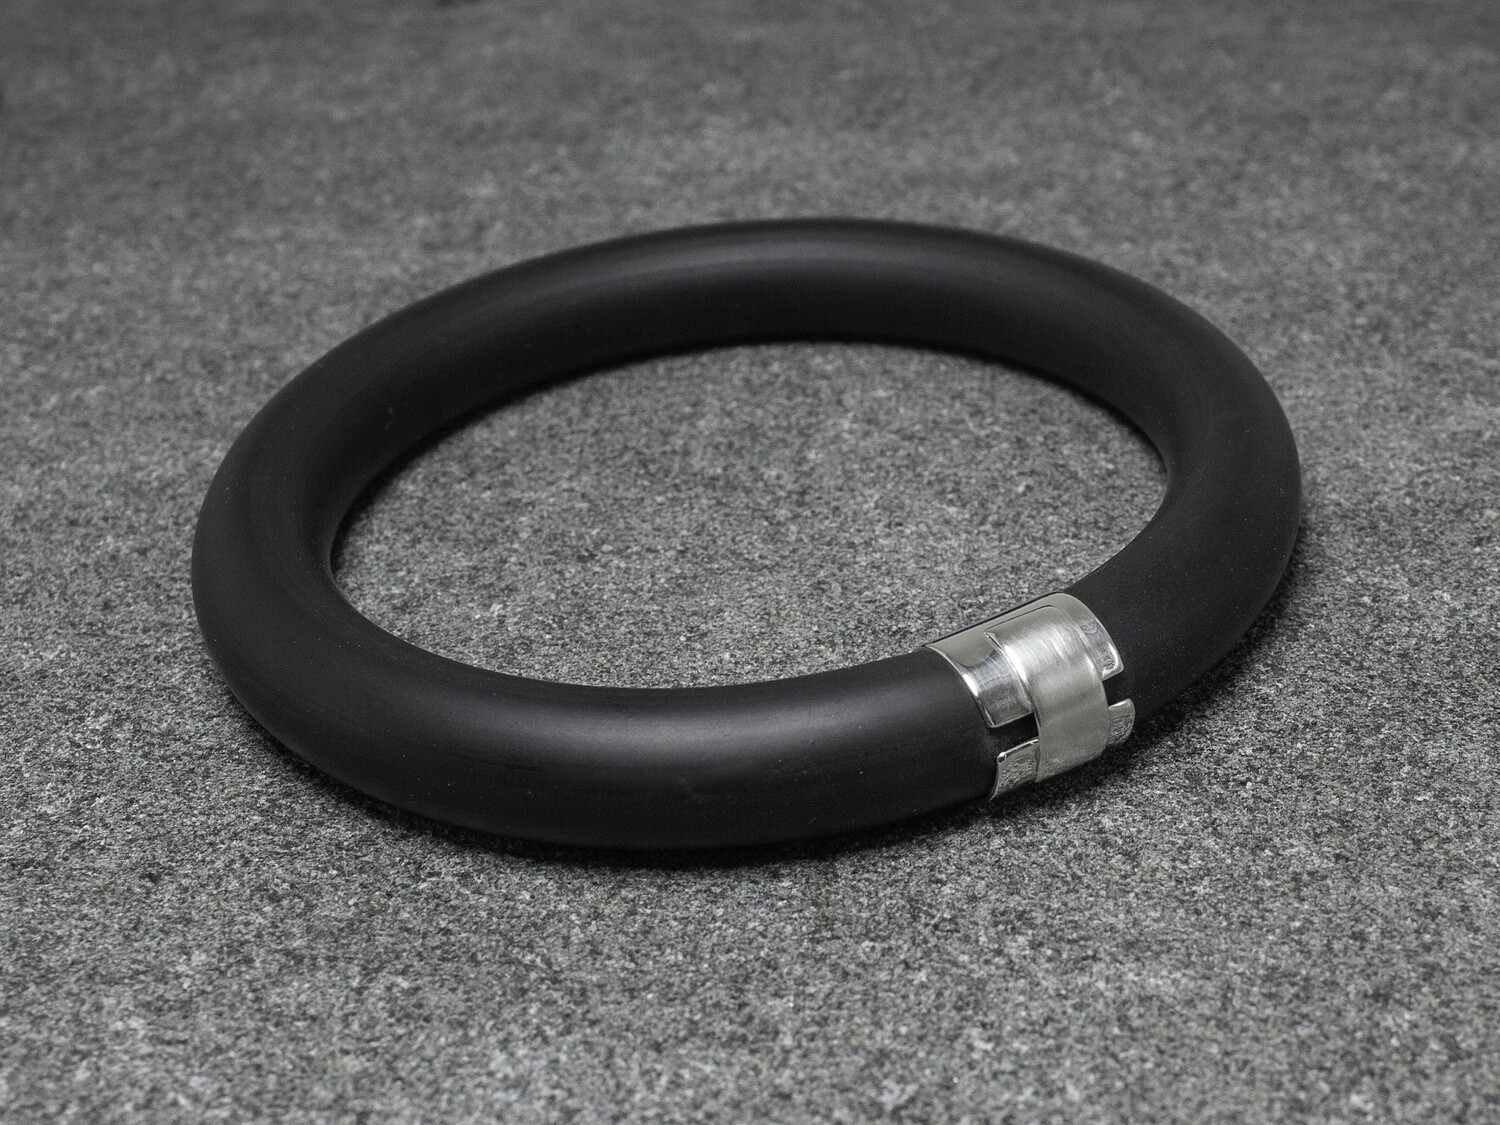 Modern Black Bracelet made of silver and caoutchouc